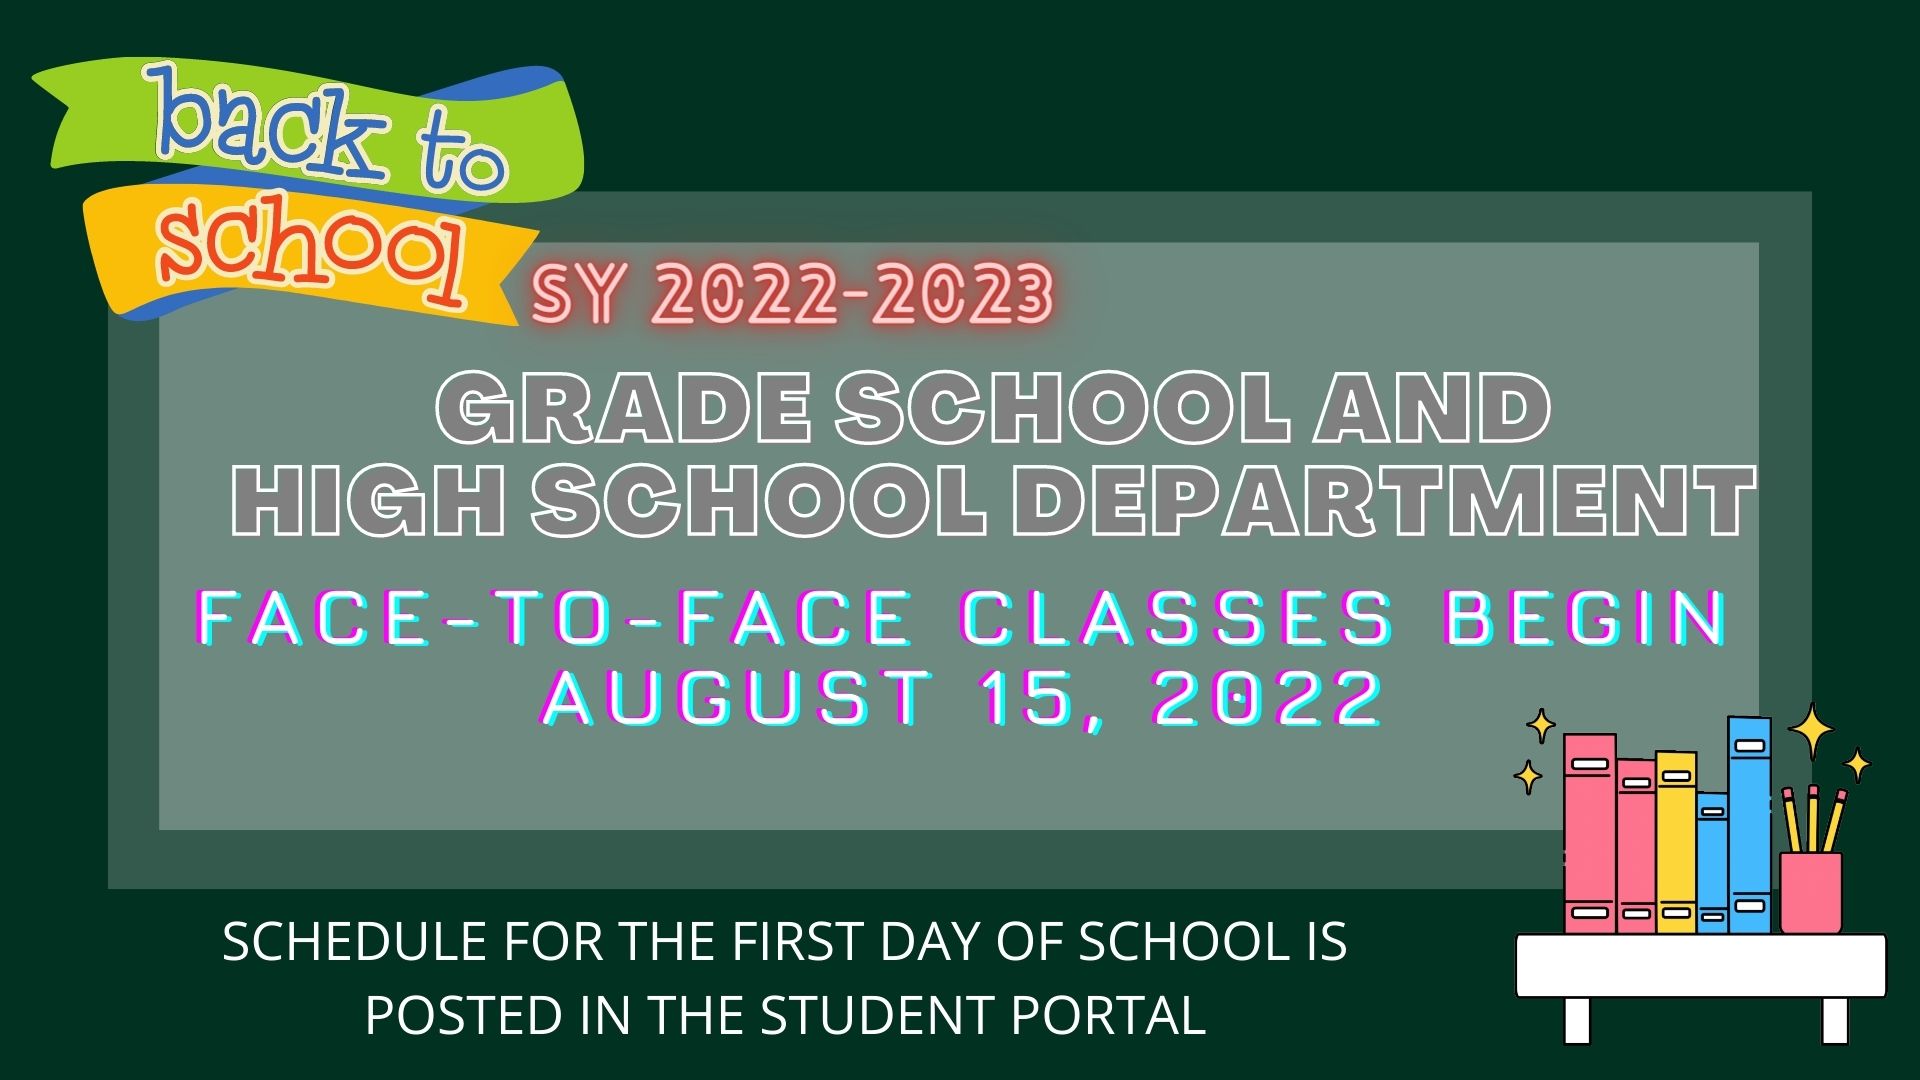 OPENING OF CLASSES SY 2022-2023